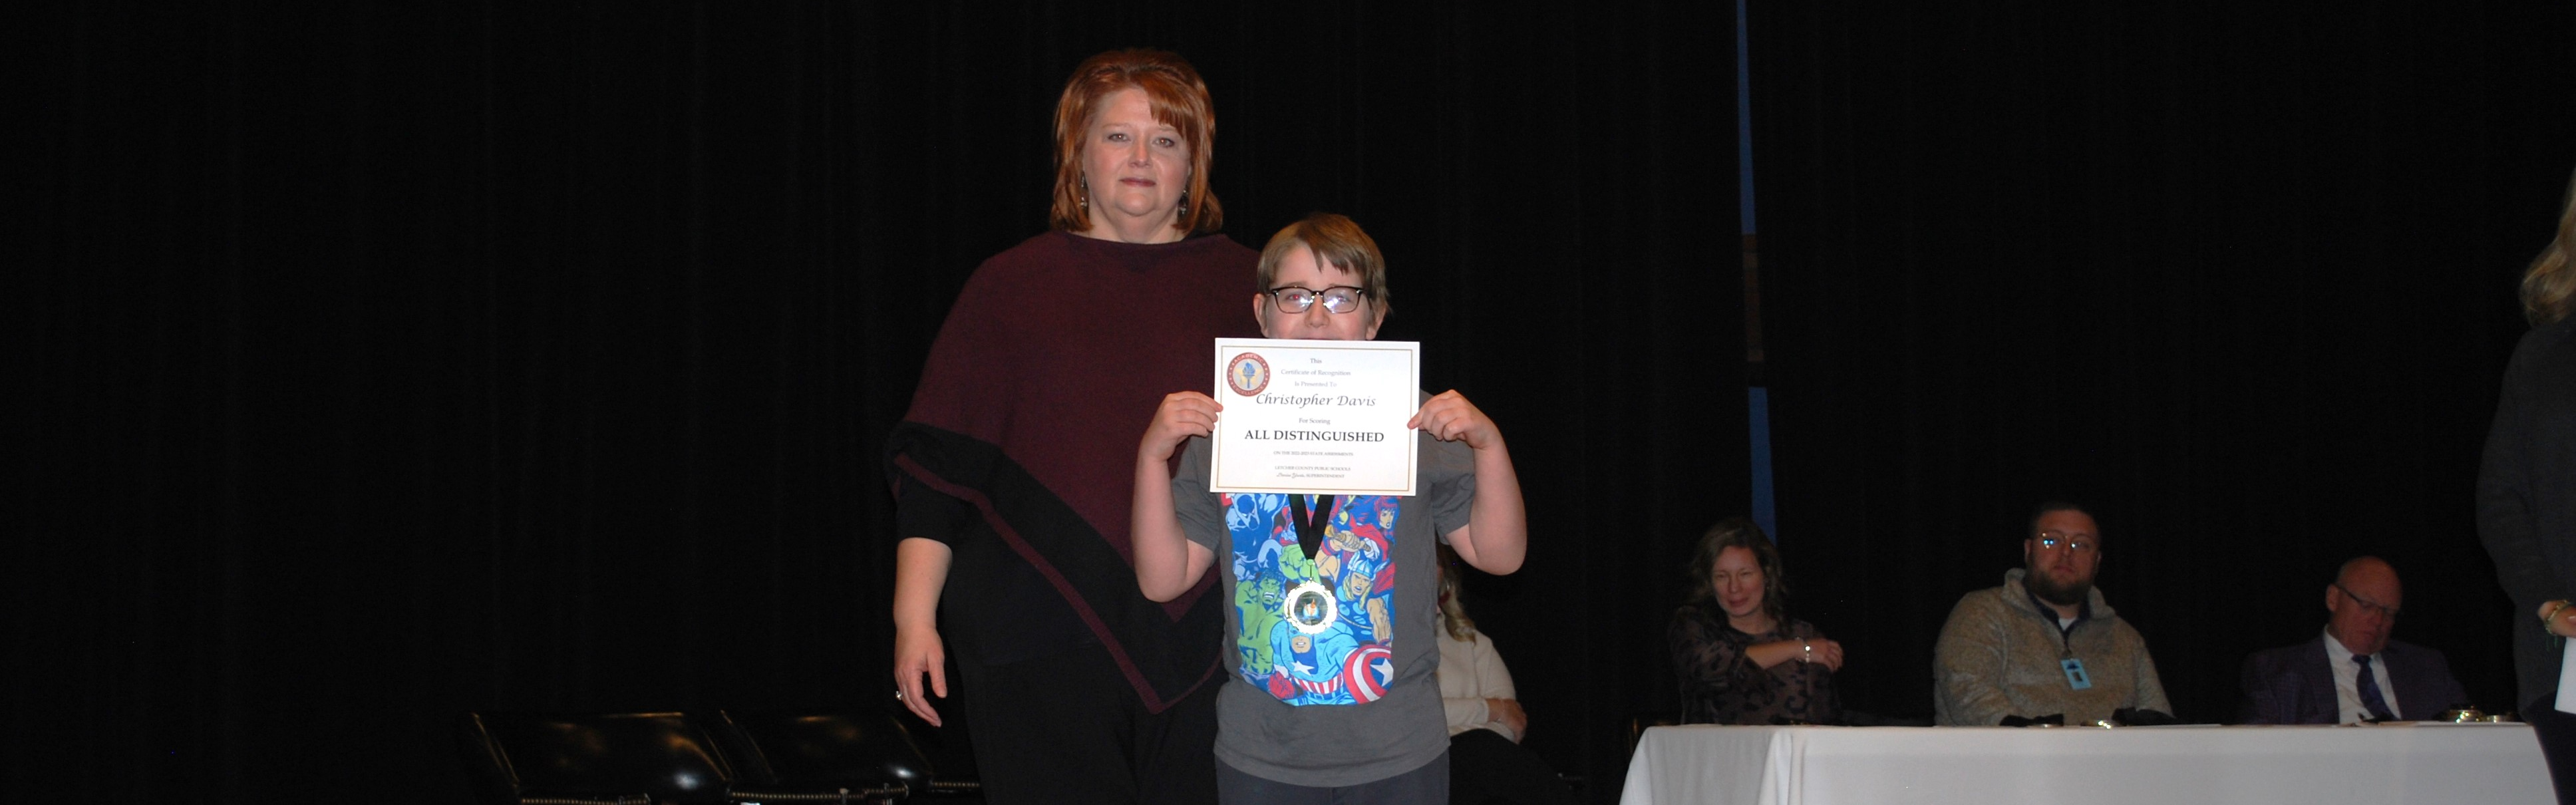 Arlie Boggs Elementary student receiving all distinguished test award.